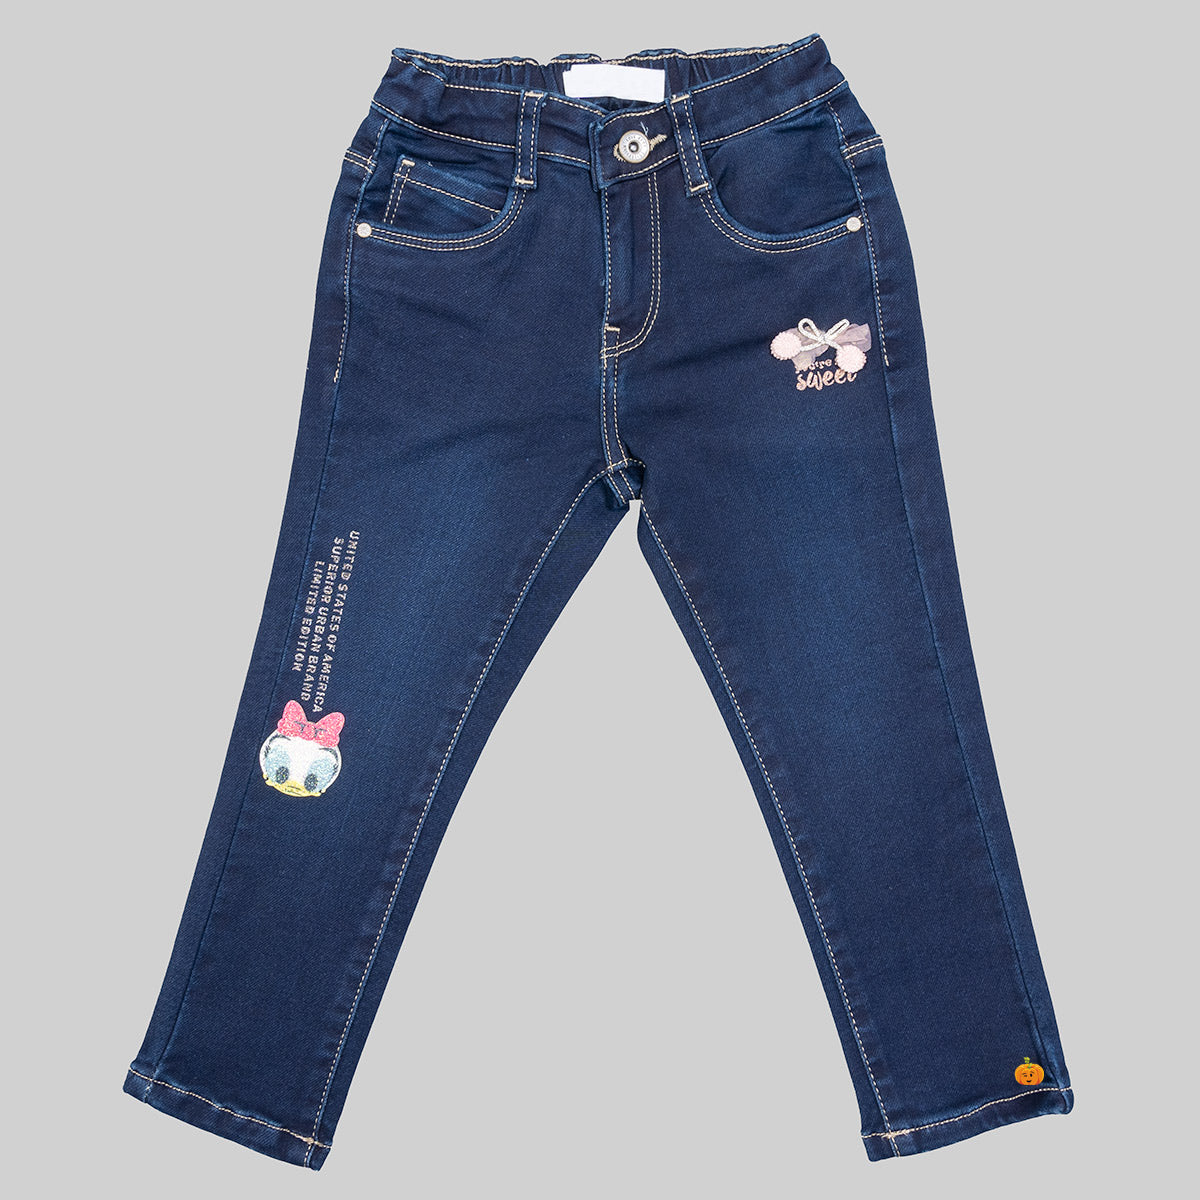 Discover 215+ denim pants for girls latest